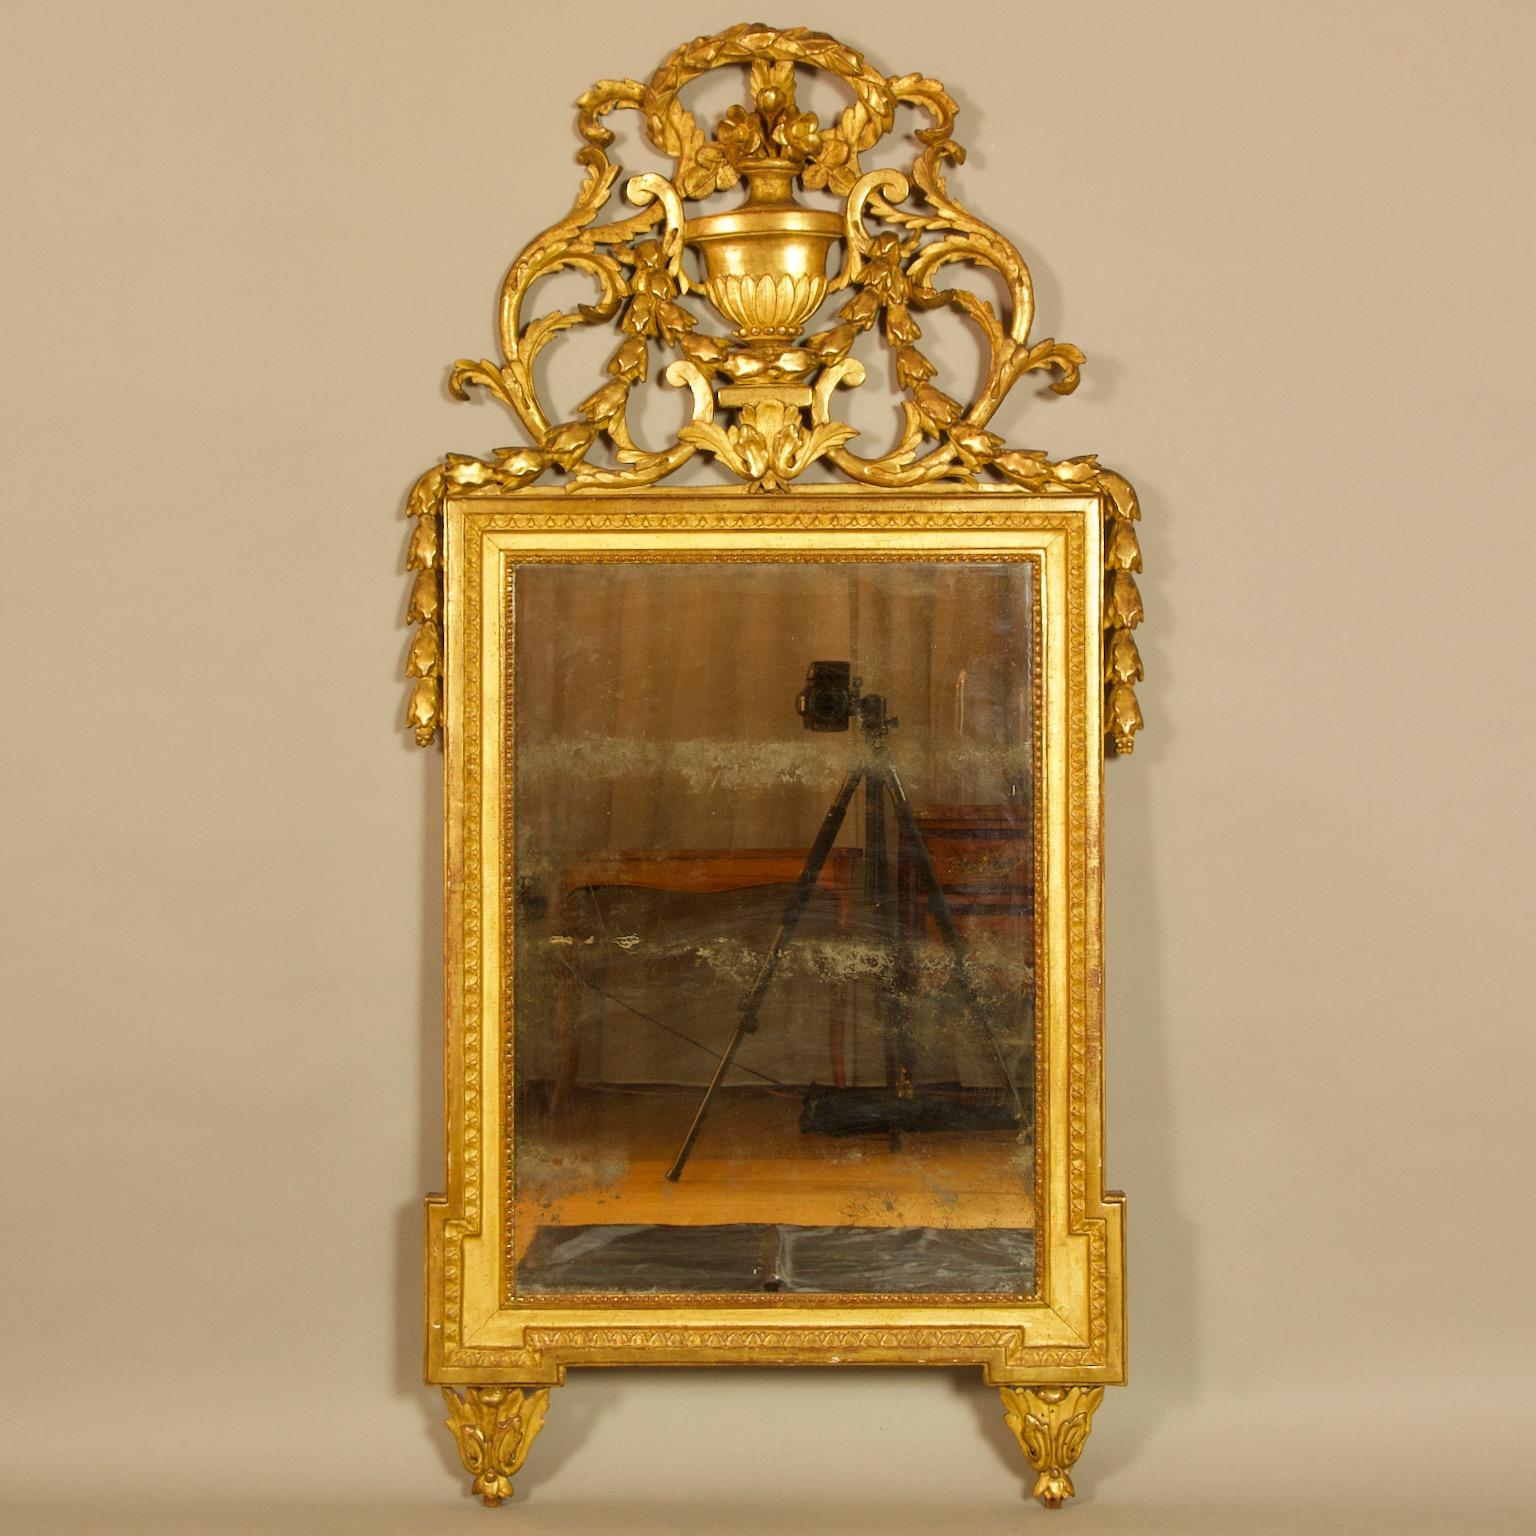 French 18th Century Louis XVI Neoclassical Giltwood Vase Motif Wall Mirror

The giltwood mirror containing the original mercury mirror plate within a moulded and beaded frame without-set corners. The large, pierced cresting elaborately carved with a